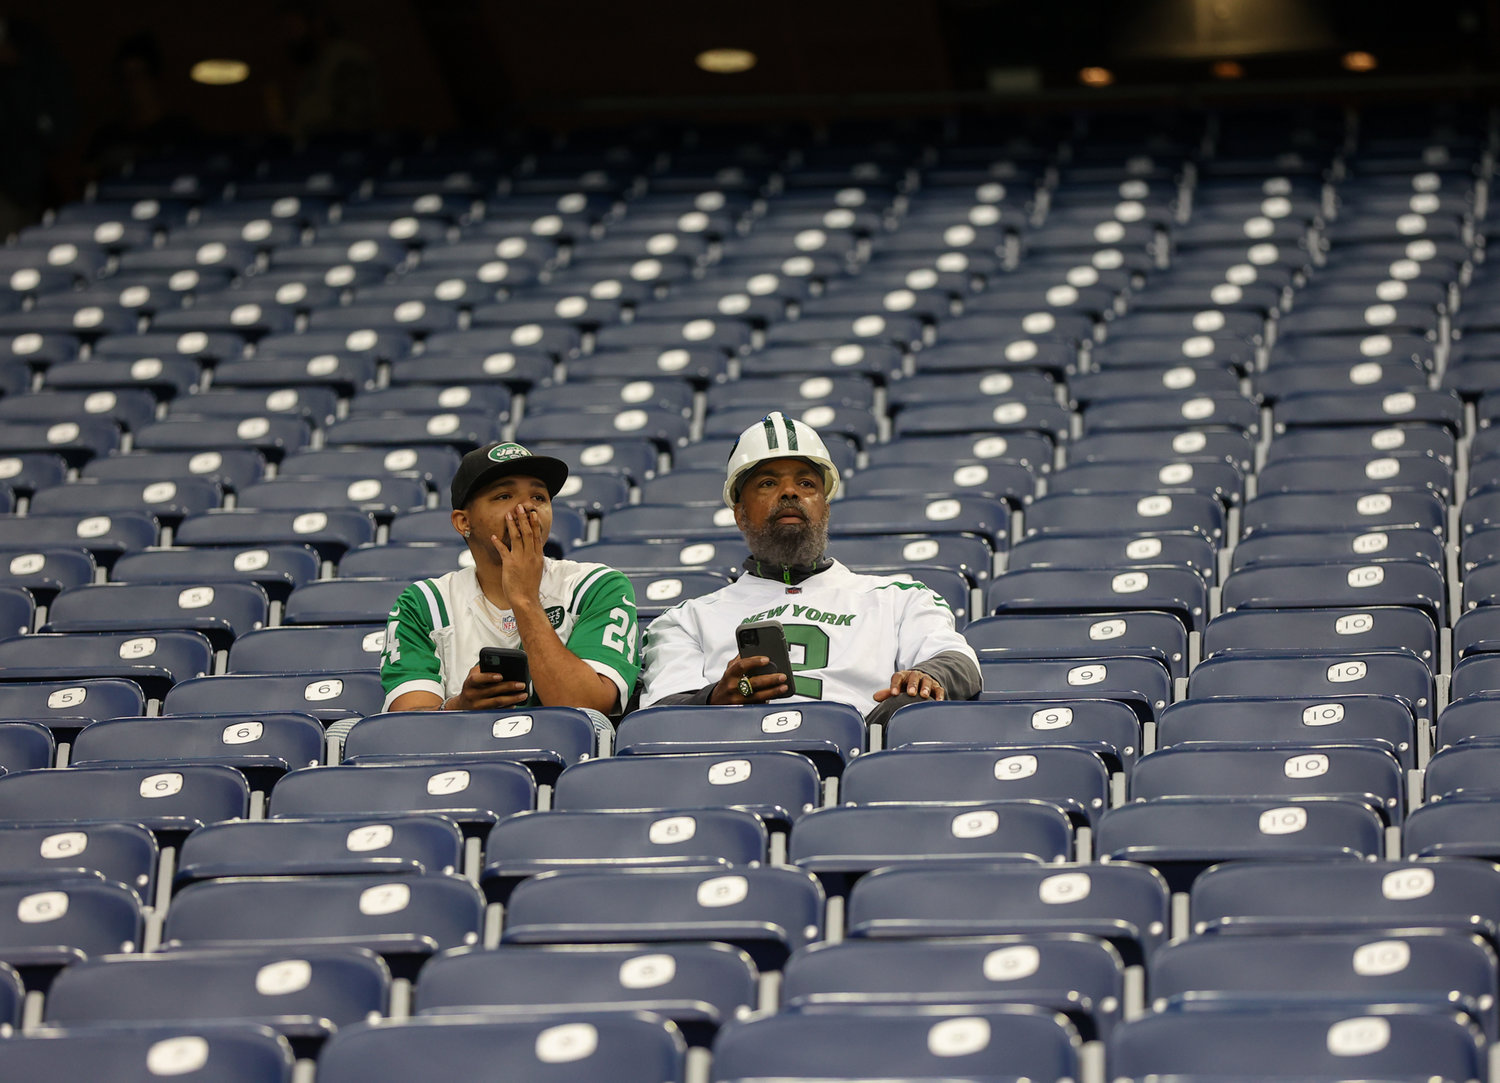 A pair of New York Jets fans arrive early for an NFL game between the Houston Texans and the New York Jets on November 28, 2021 in Houston, Texas.